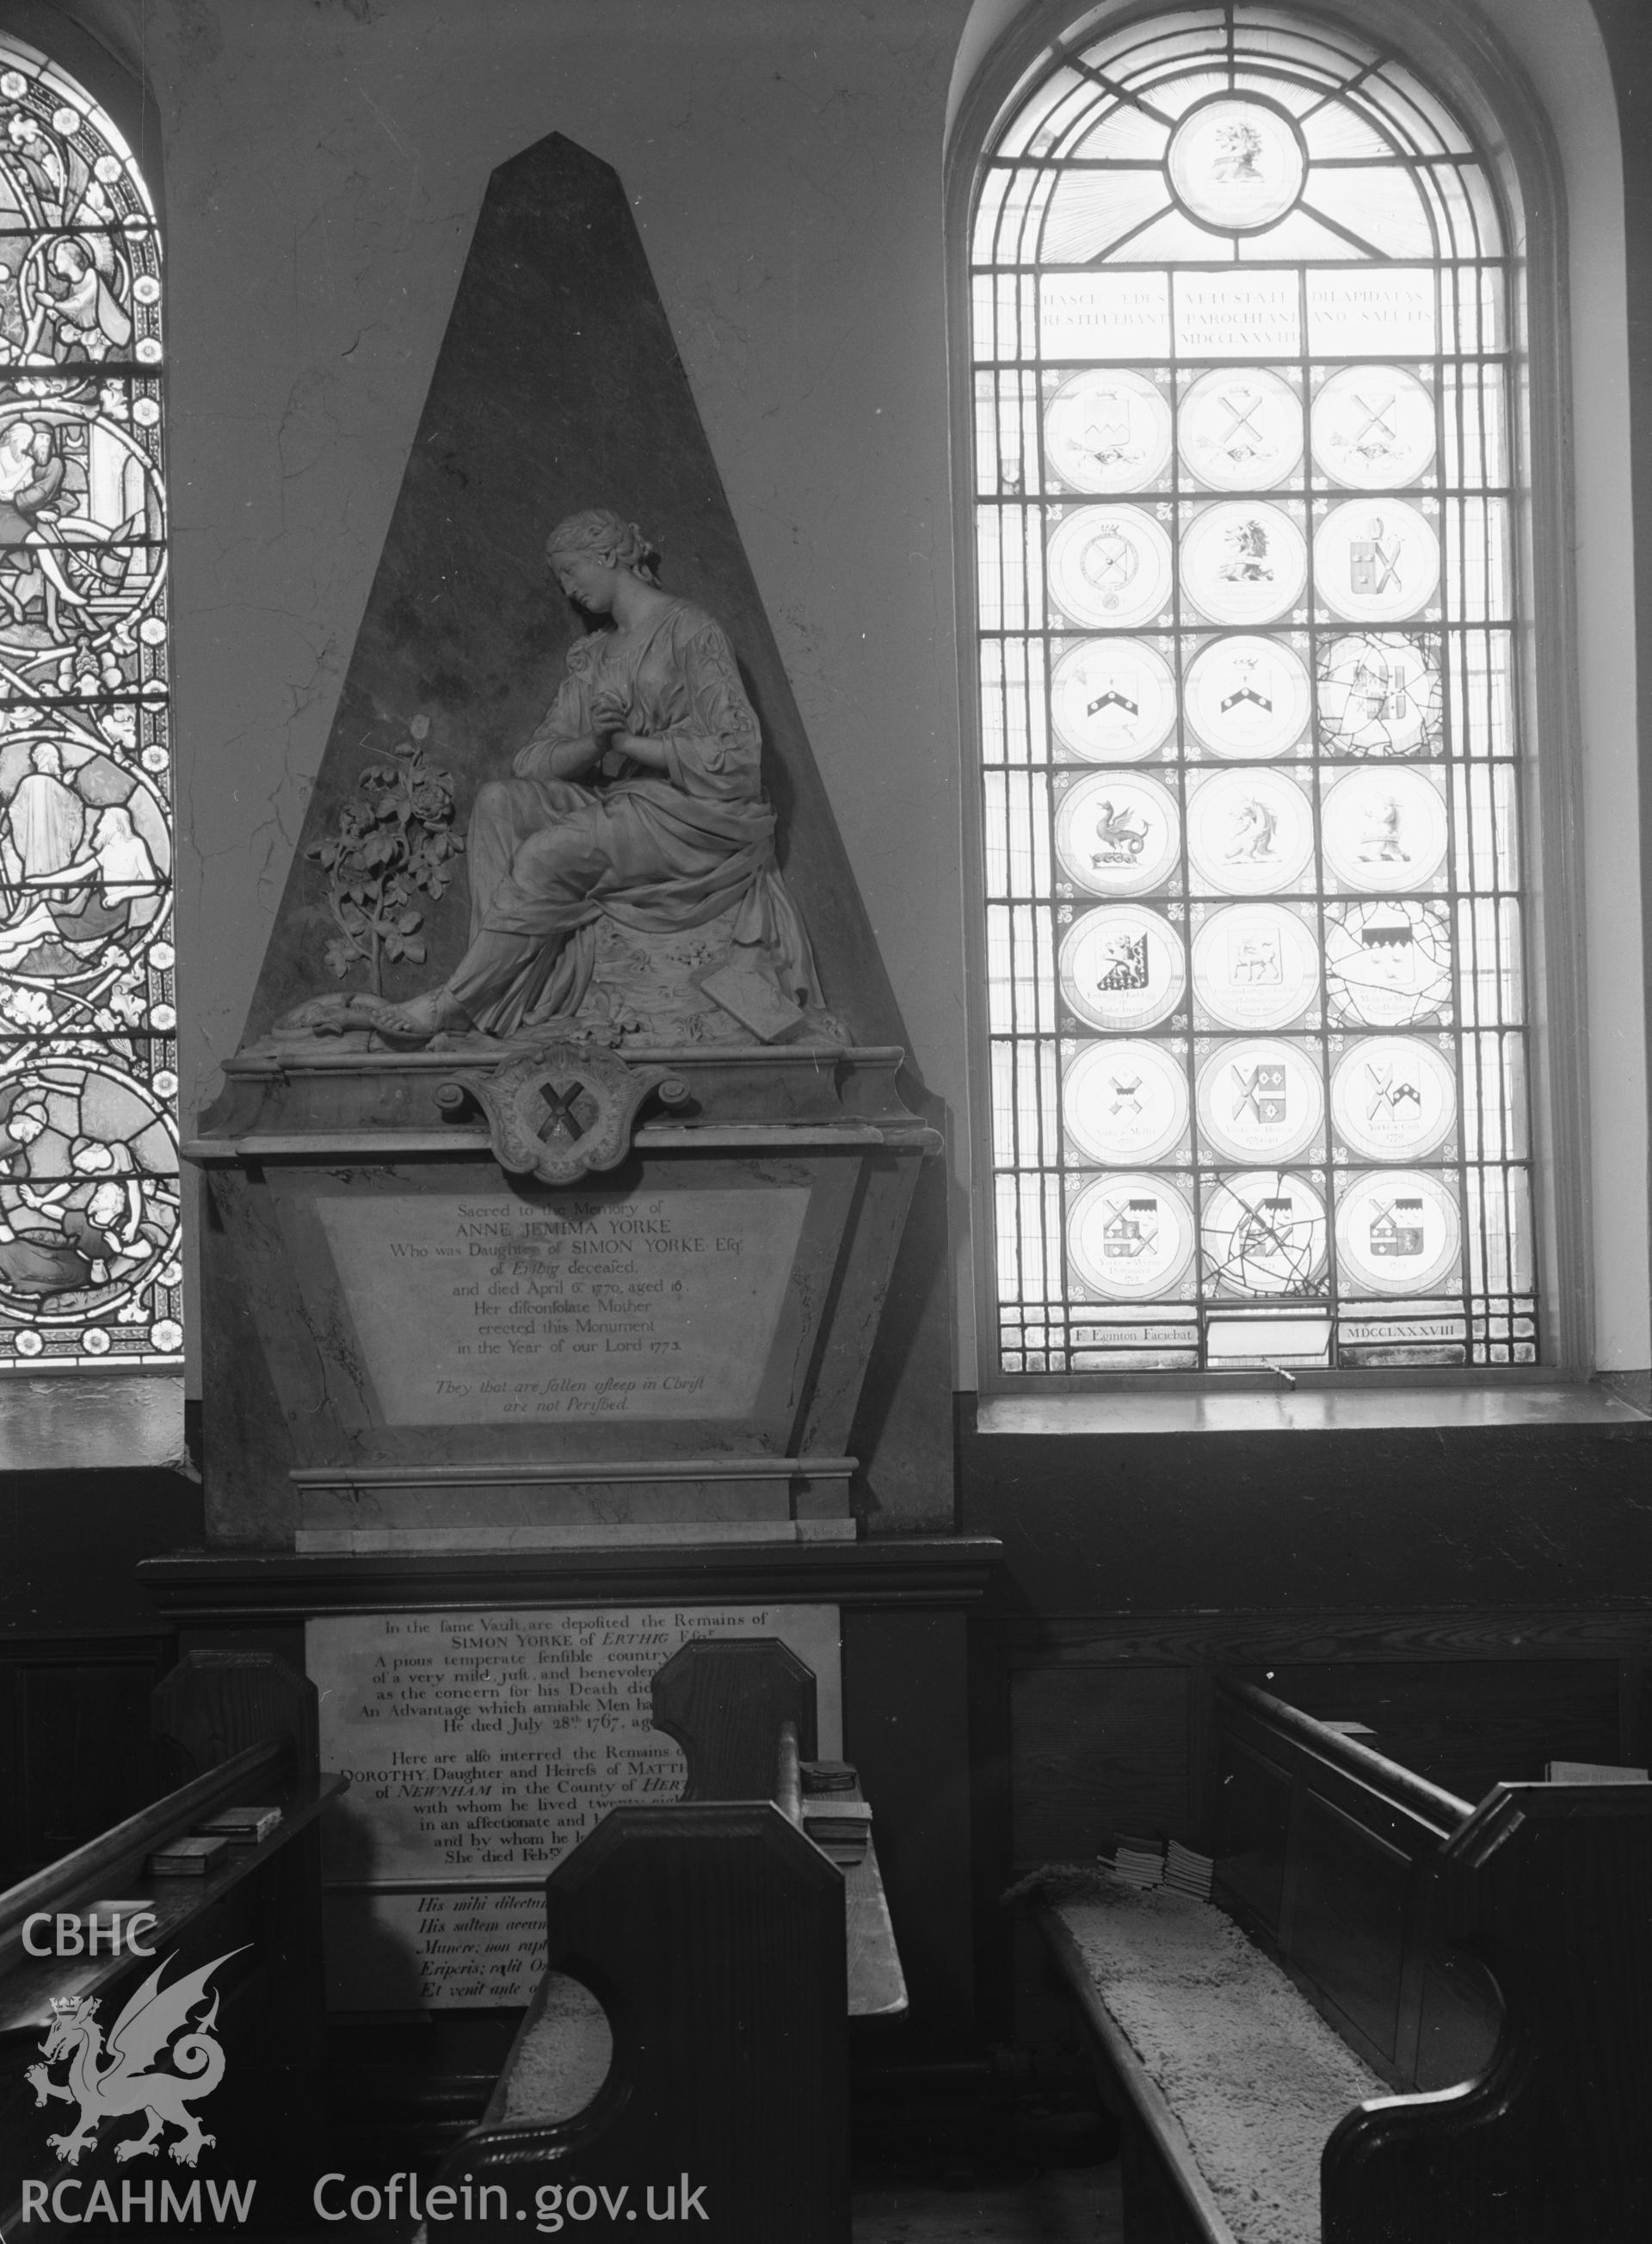 Interior: Annw Jemima Yorke 1770 and W. Taylor 1773 memorial